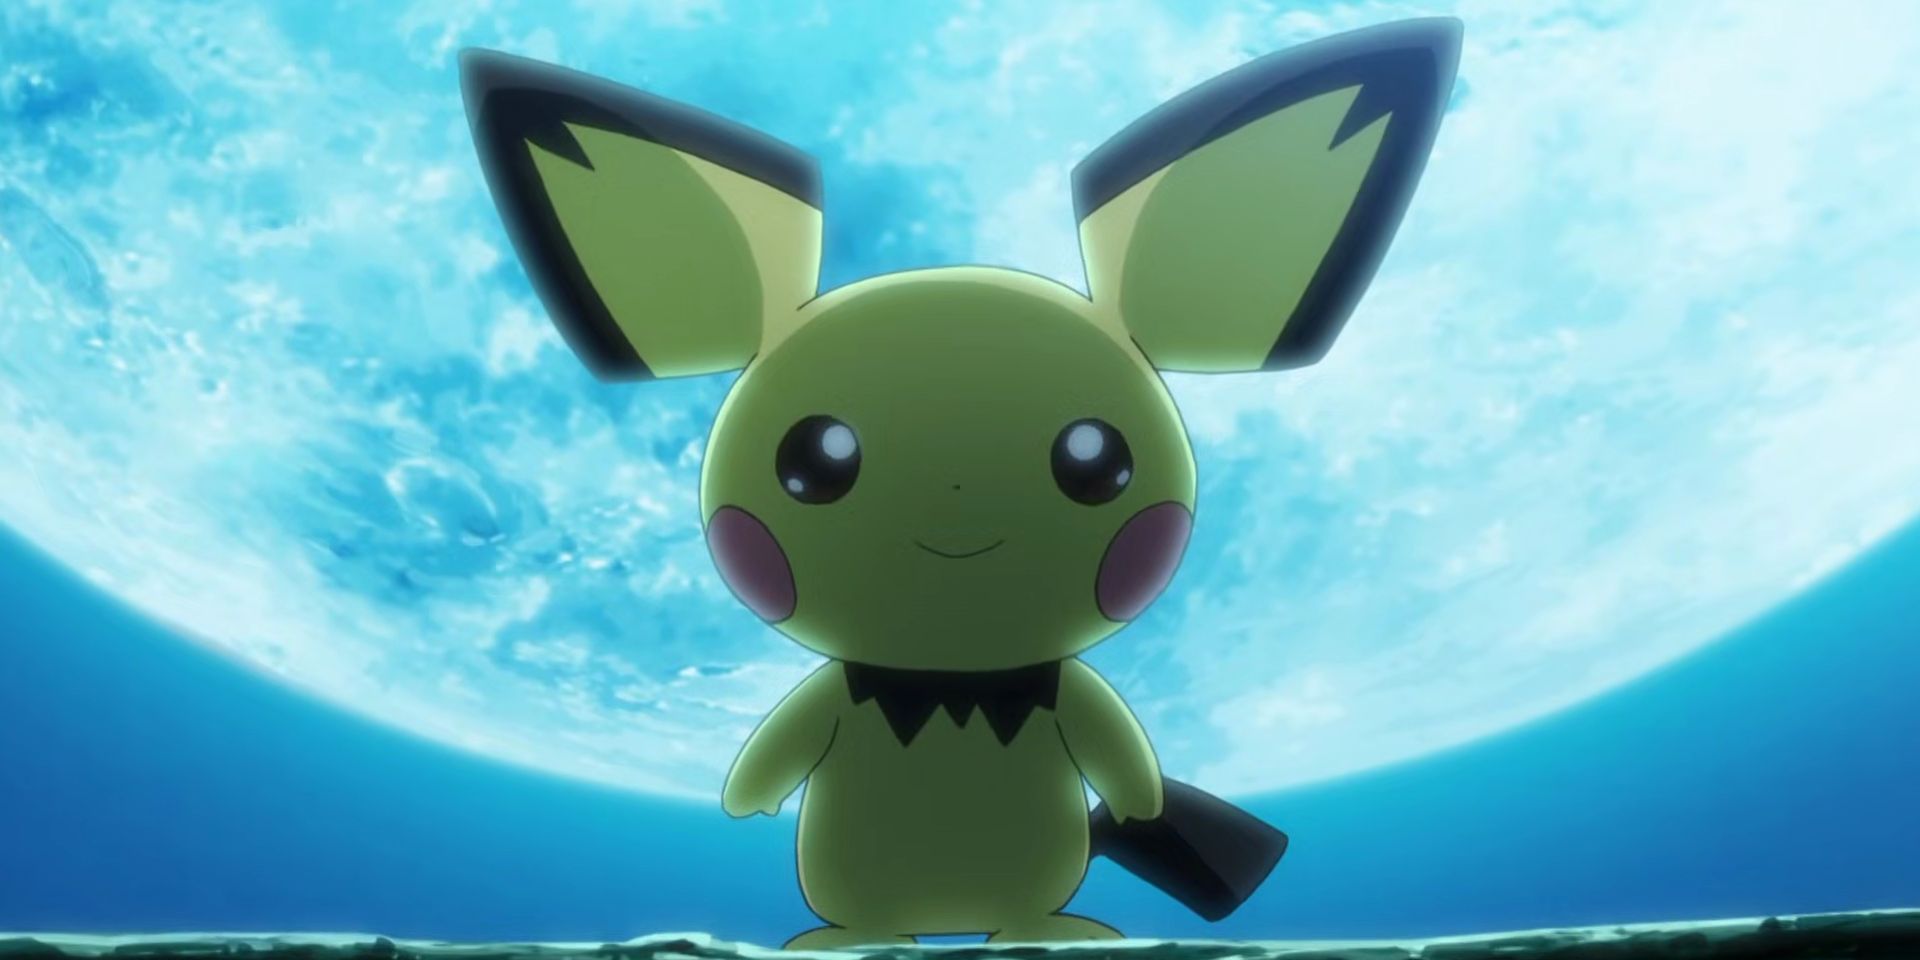 New Pokemon Series Features Pikachu's Life Before Ash as Pichu